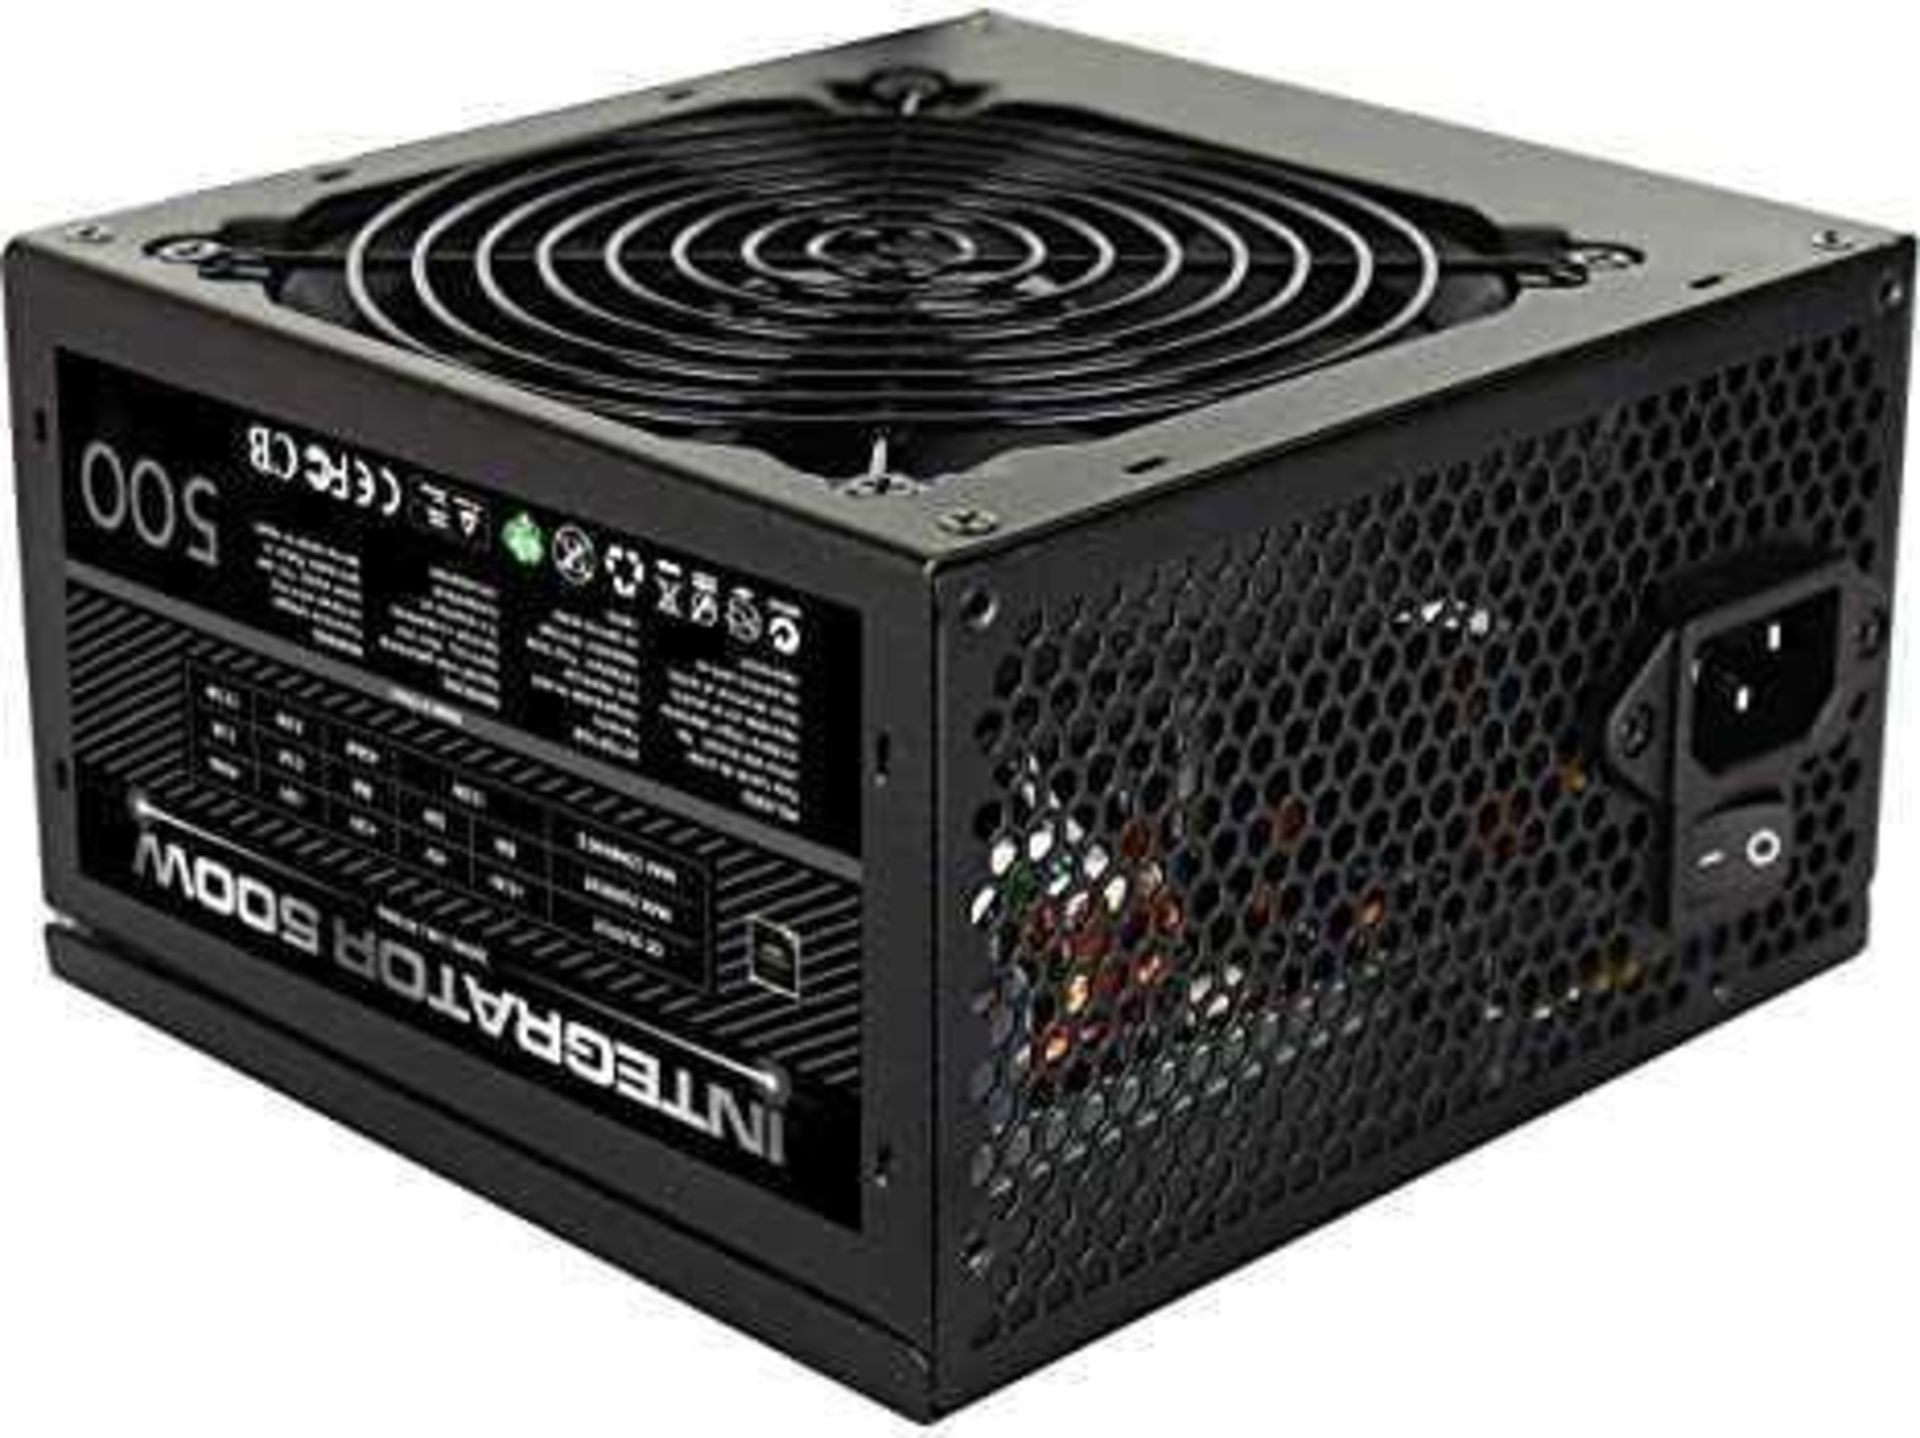 Rrp £120 Lot To Contain 2 Boxed Aerocool Integrator 500W Power Supply Units (Appraisals Available